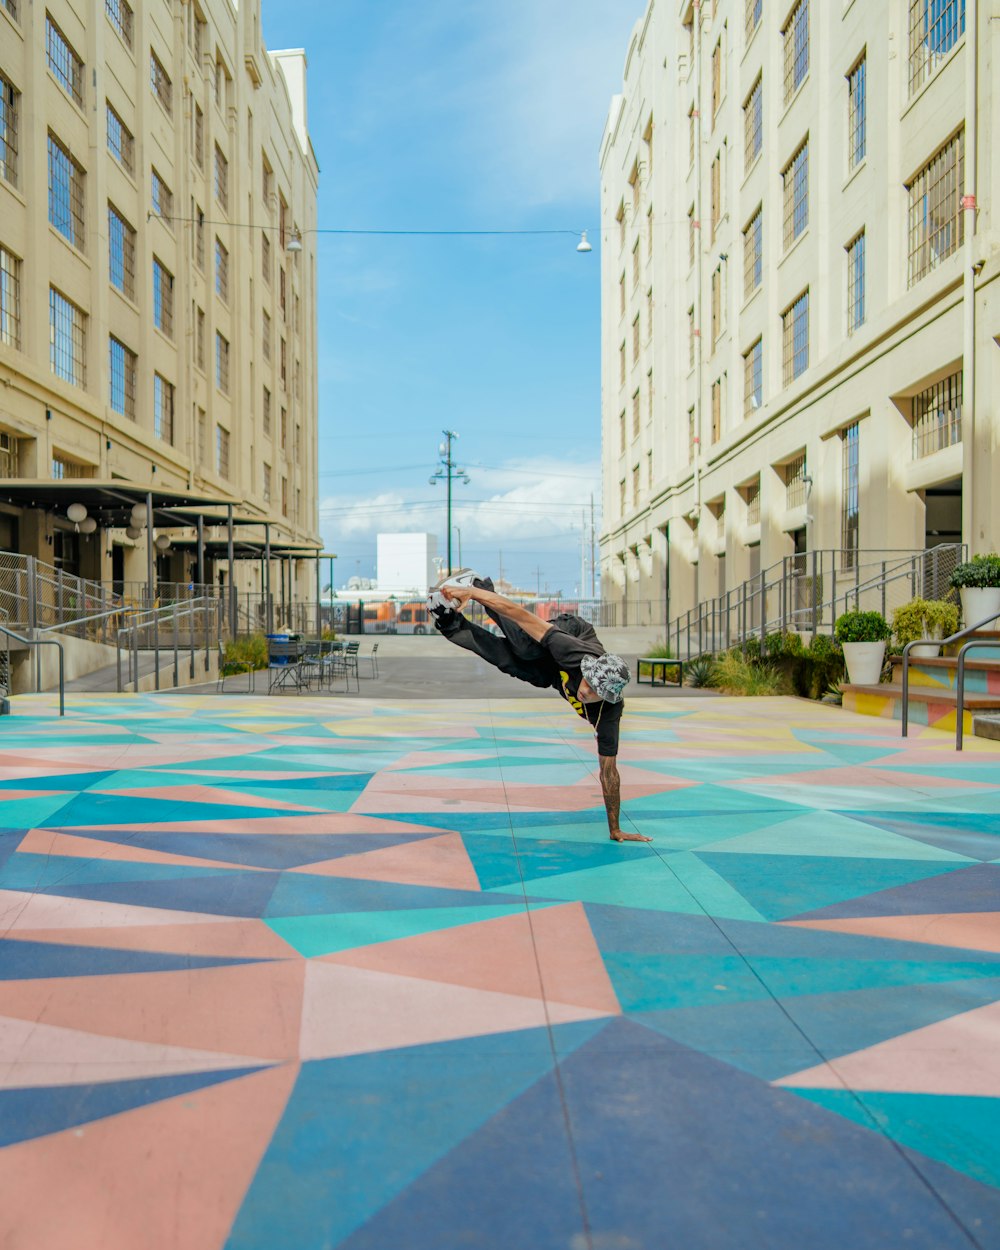 a person doing a handstand on a colorful mat in a city